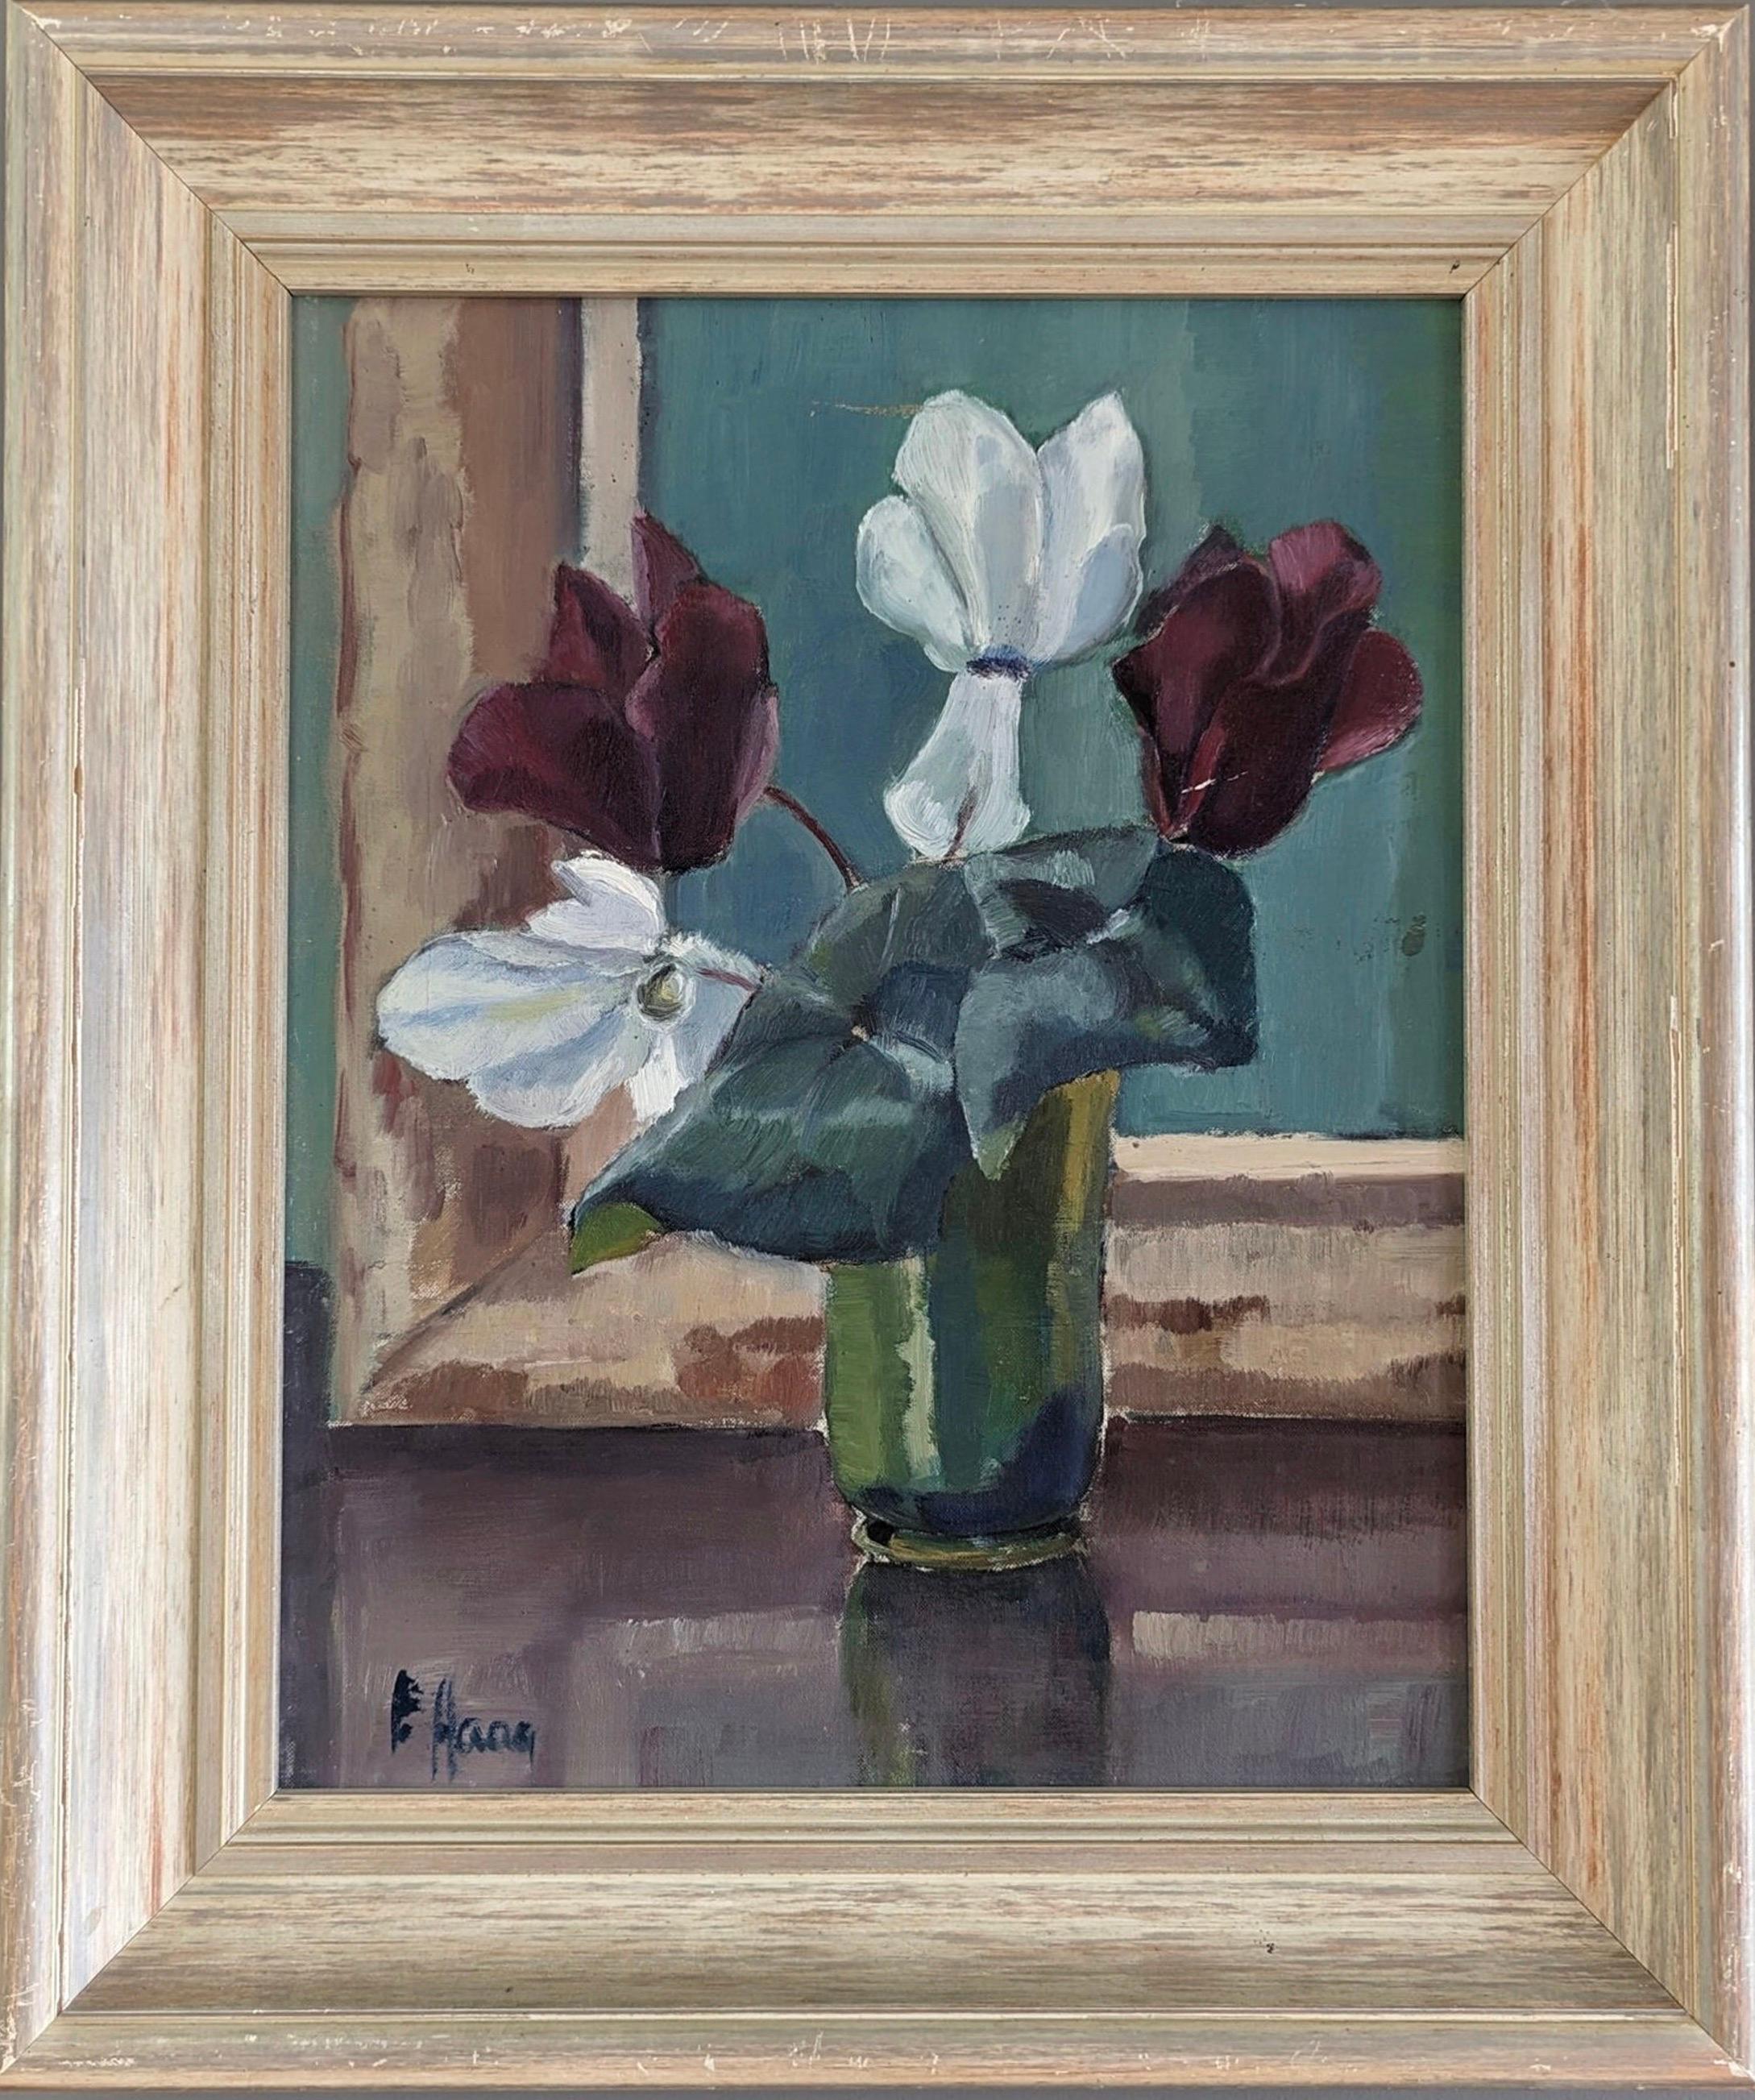 Unknown Still-Life Painting - Vintage Mid-Century Modern Still Life Framed Oil Painting - Vase of Cyclamens